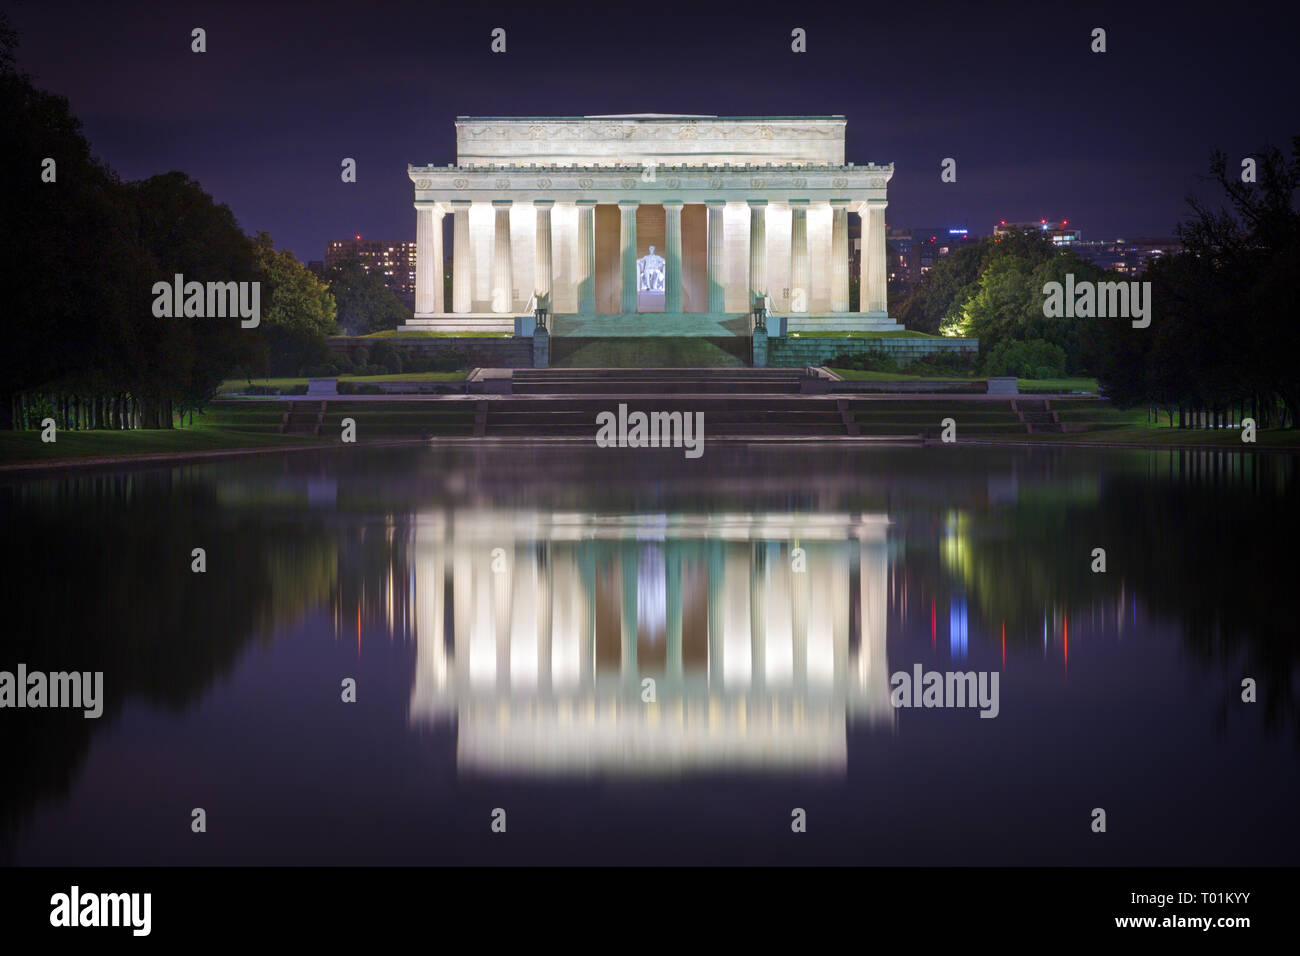 Lincoln Memorial at night with reflection in pool Stock Photo